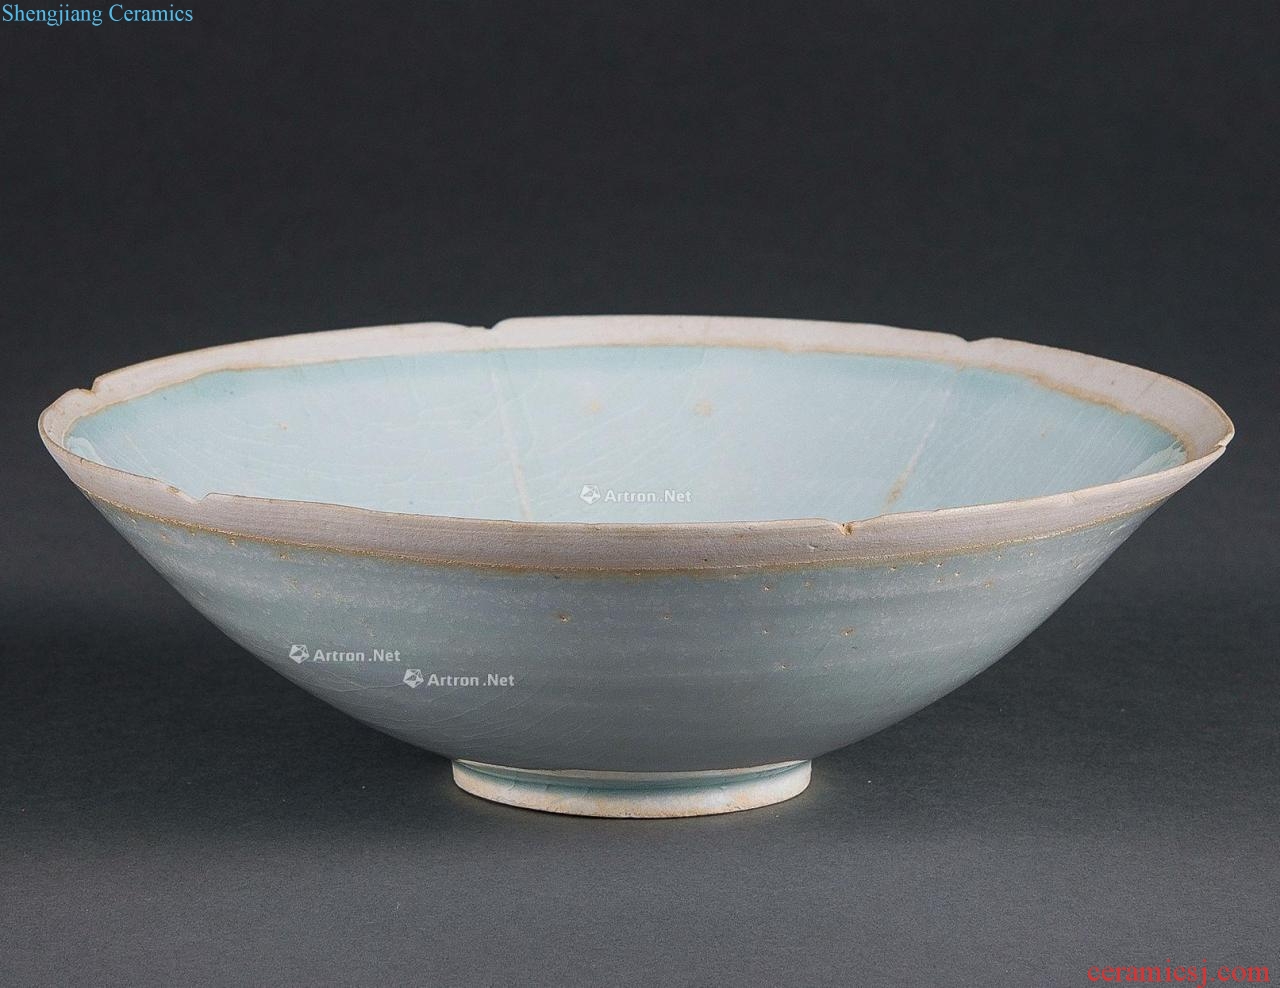 The southern song dynasty Left kiln green bowl with six arrises